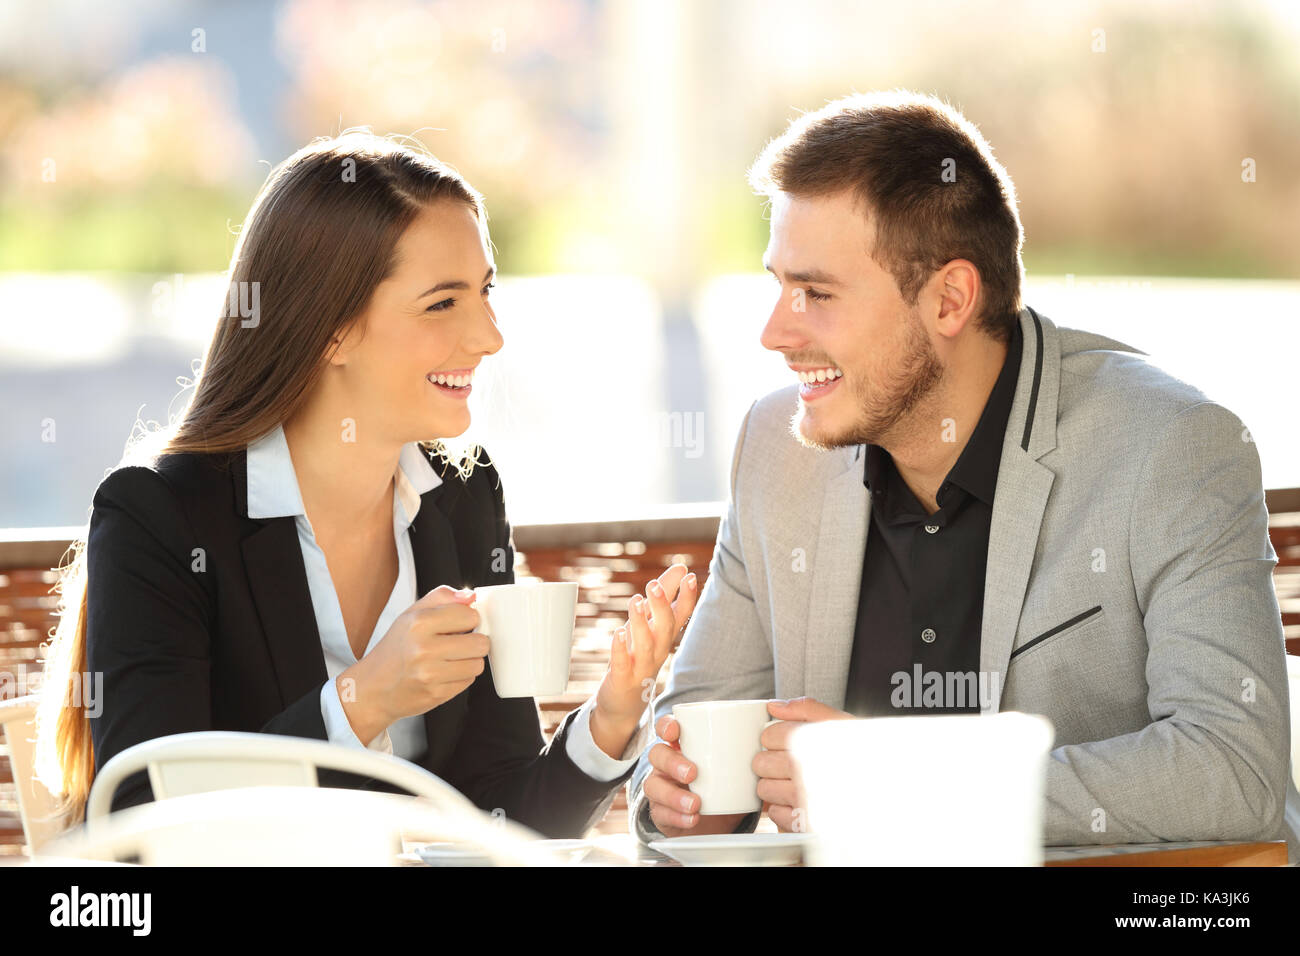 Two executives talking during a cofee break sitting in a bar terrace with a warm backlight Stock Photo